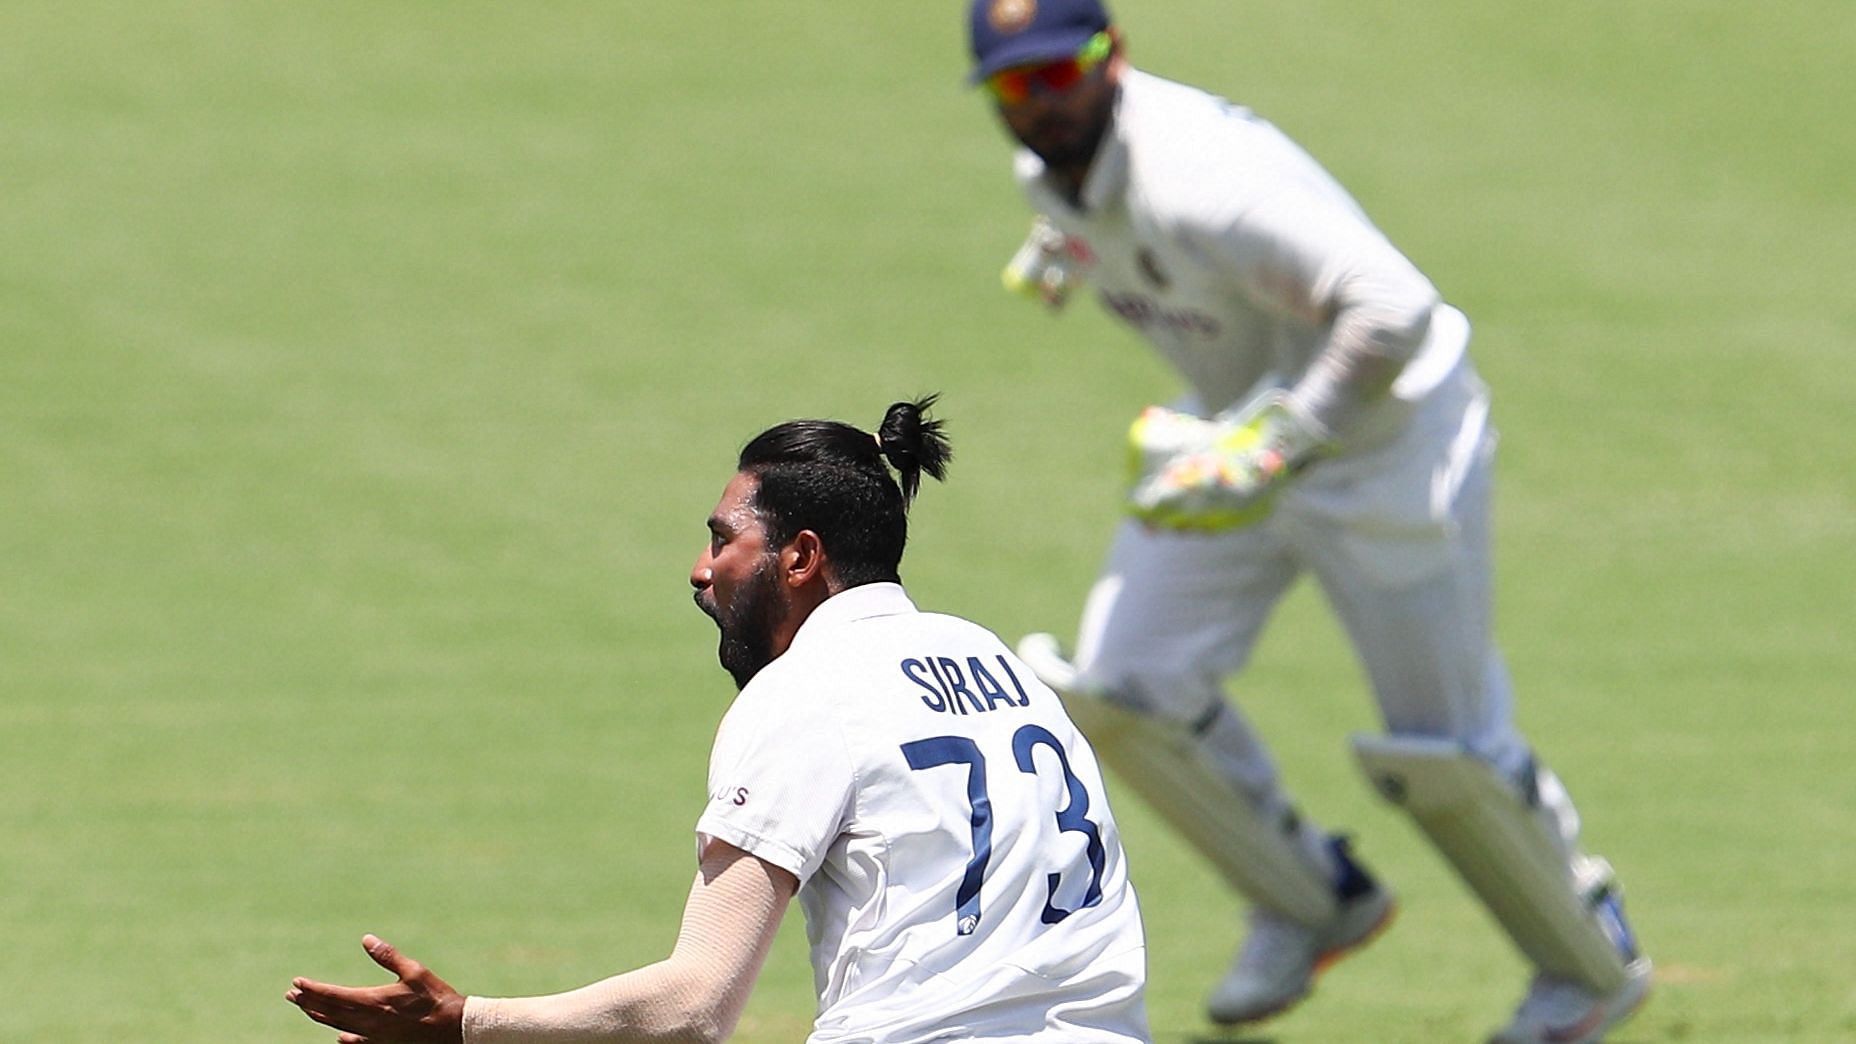 Mohammed Siraj celebrates a wicket on Day 4 at the Gabba.&nbsp;